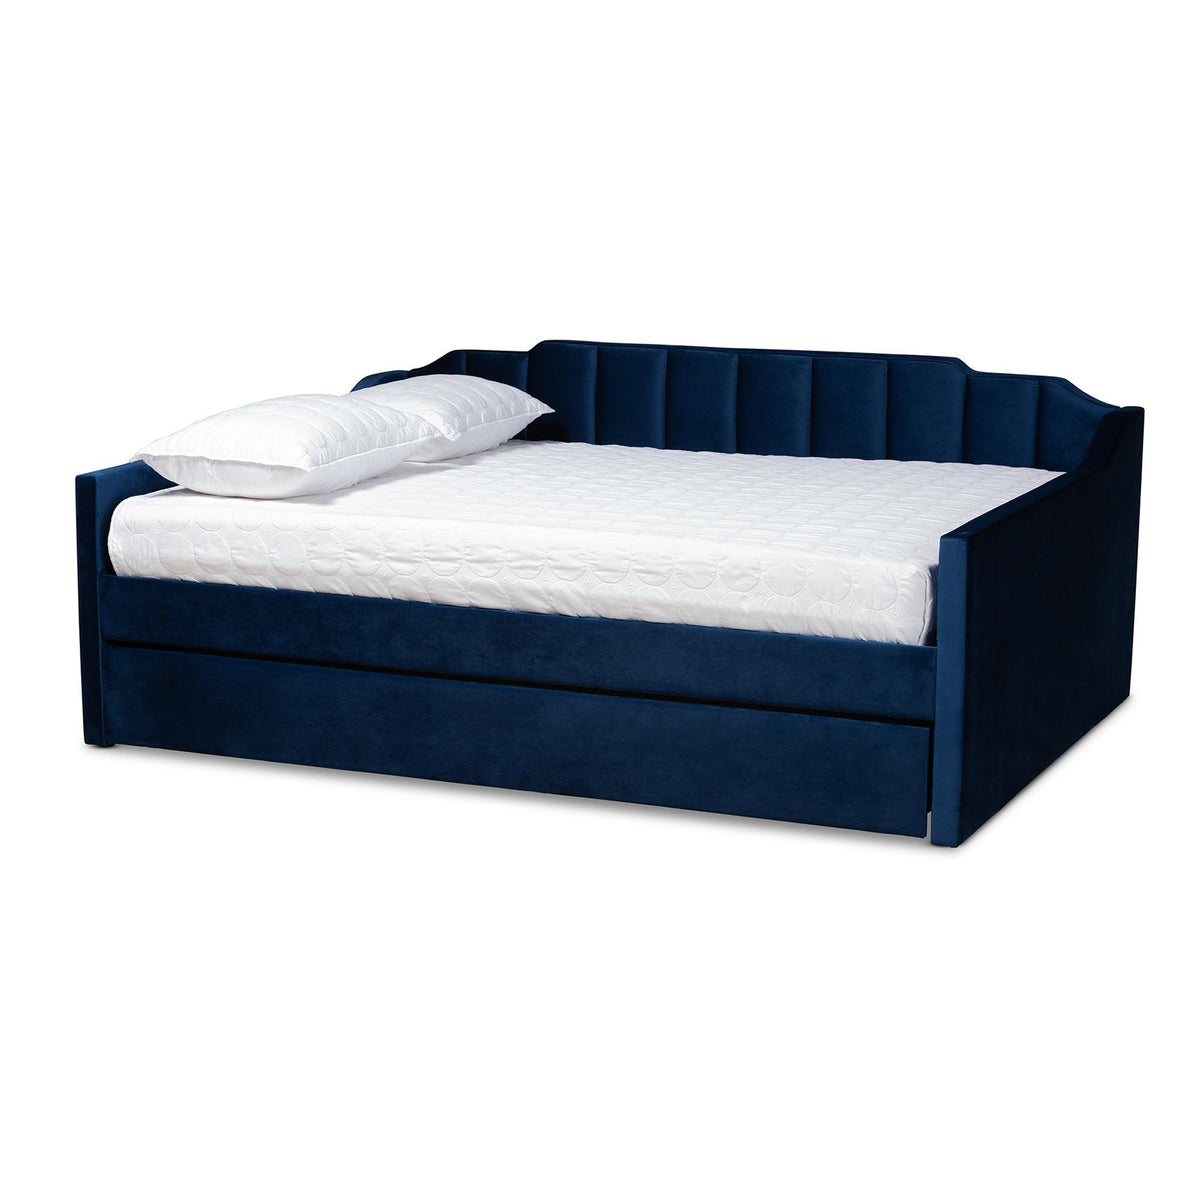 Baxton Studio Lennon Modern And Contemporary Navy Blue Velvet Fabric Upholstered Queen Size Daybed With Trundle - CF9172-Navy Blue Velvet-Daybed-Q/T